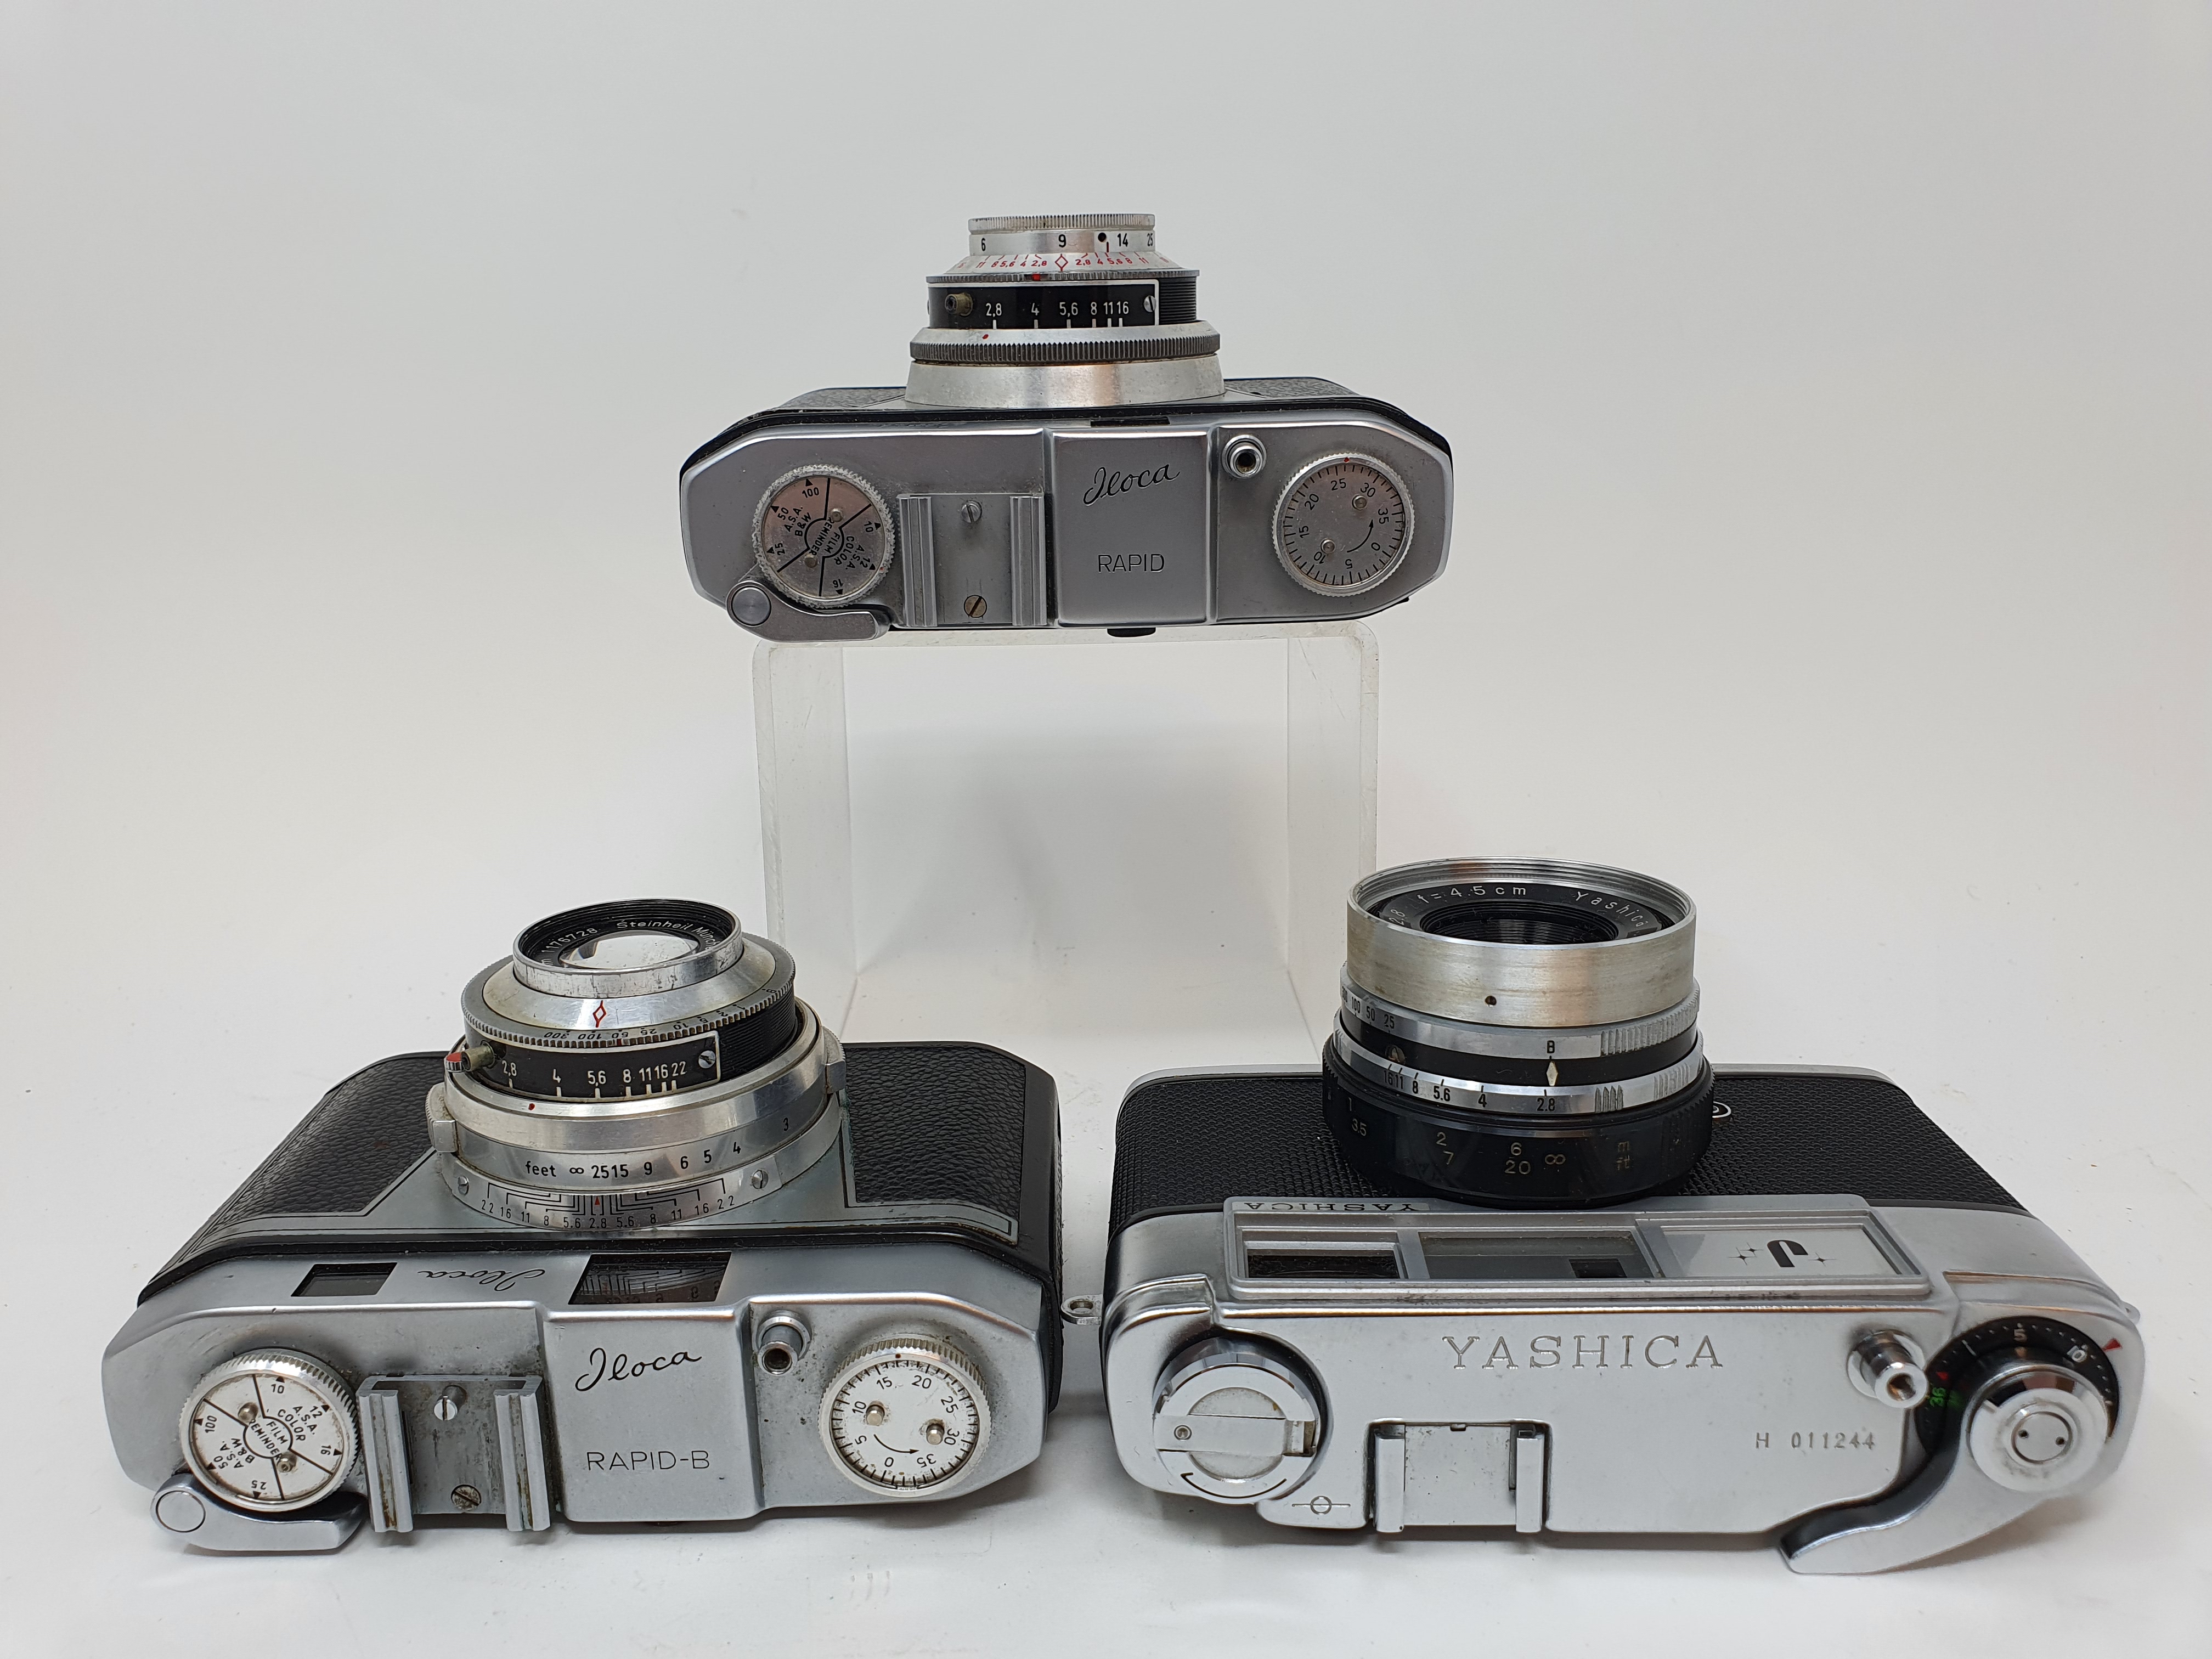 A Yashica camera, an Iloca Rapid-B camera and an Iloca Rapid camera, in outer leather case - Image 3 of 5